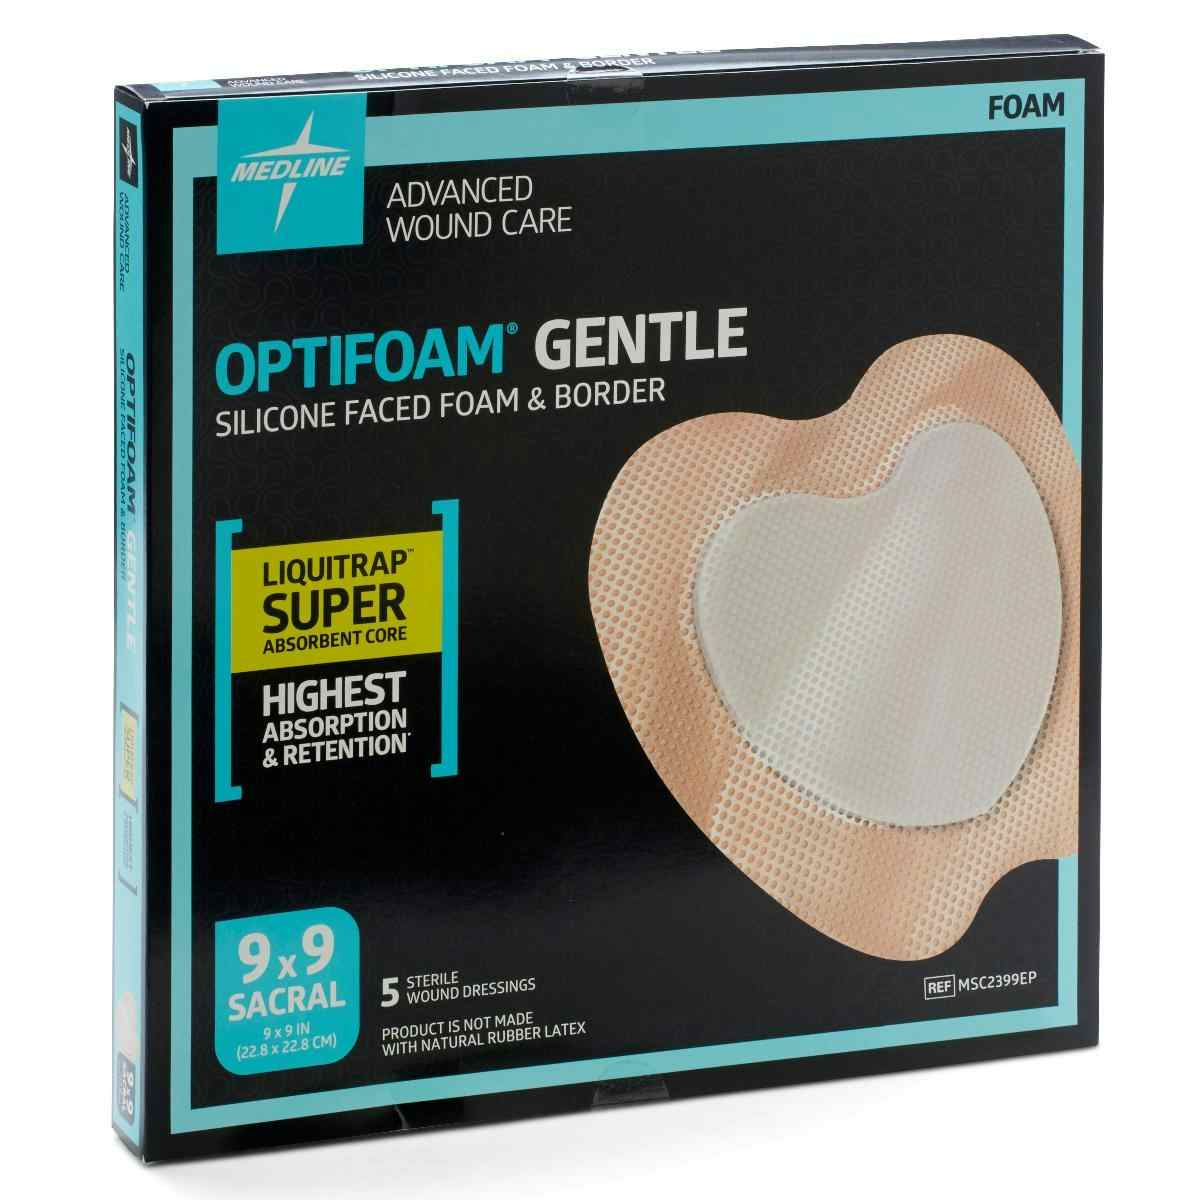 Optifoam Gentle LQ Silicone-Faced Foam Dressing with Liquitrap, MSC2399EPZ, 9 X 9 Inches - Sacrum - Box of 5